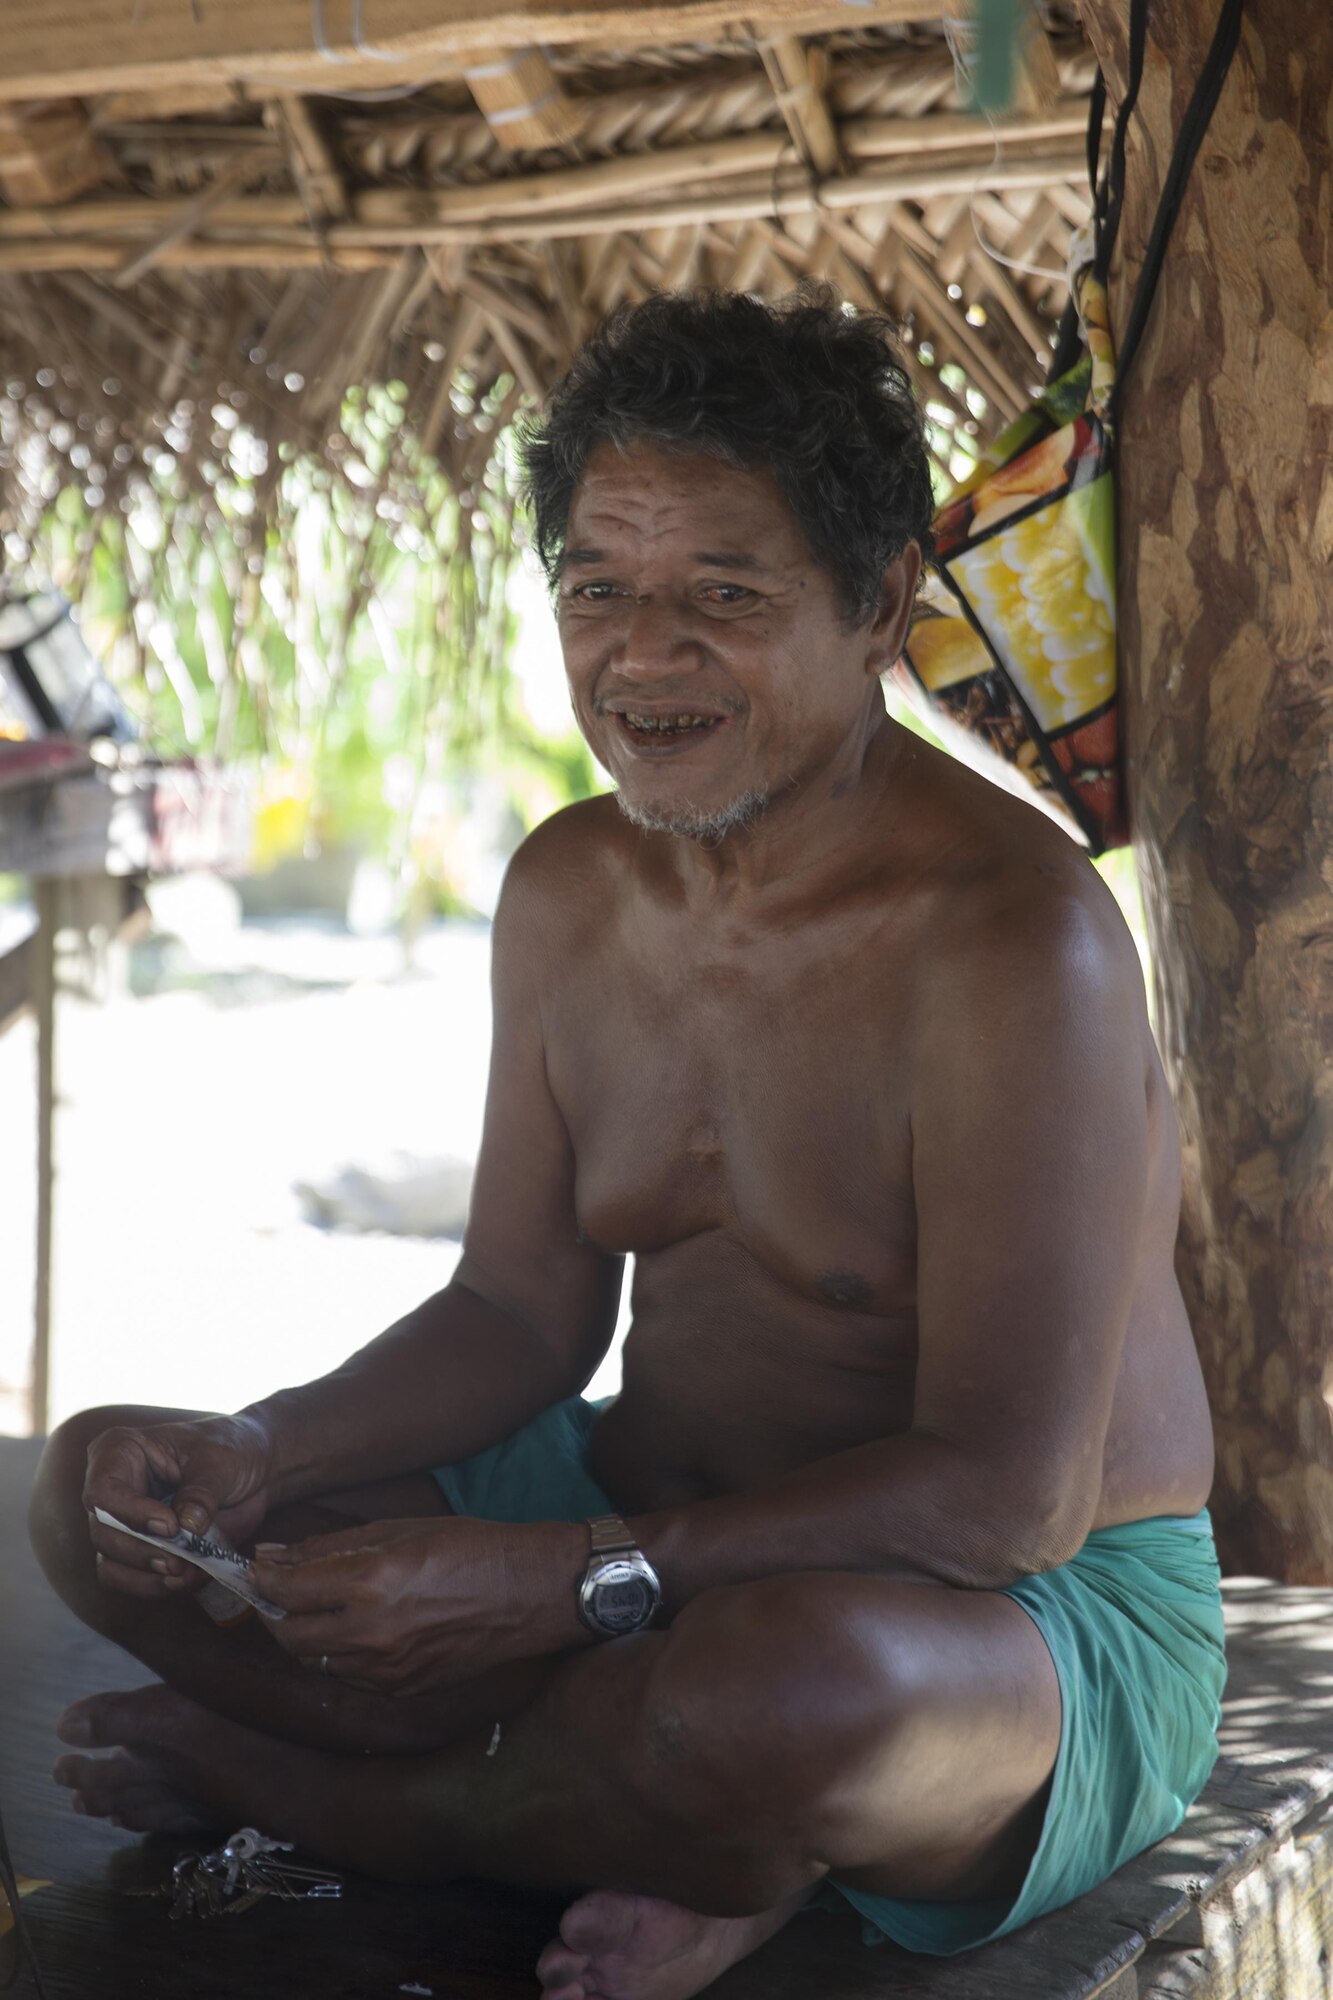 Louis Mangtau, Chief of Fais Island, talks at his house, Dec. 8, 2015, at Fais Island, Federated States of Micronesia. The Chief said, "I was kid, my father took me to the drop zone to watch U.S. aircraft dropped the box. That was so exciting moment. I still feel same when an aircraft flies over in this season." Operation Christmas Drop is a humanitarian/disaster relief training event where C-130 crews provide critical supplies to 56 islands throughout the Commonwealth of the Northern Marianas, Federated States of Micronesia and Republic of Palau. (U.S. Air Force photo by Osakabe Yasuo/Released)